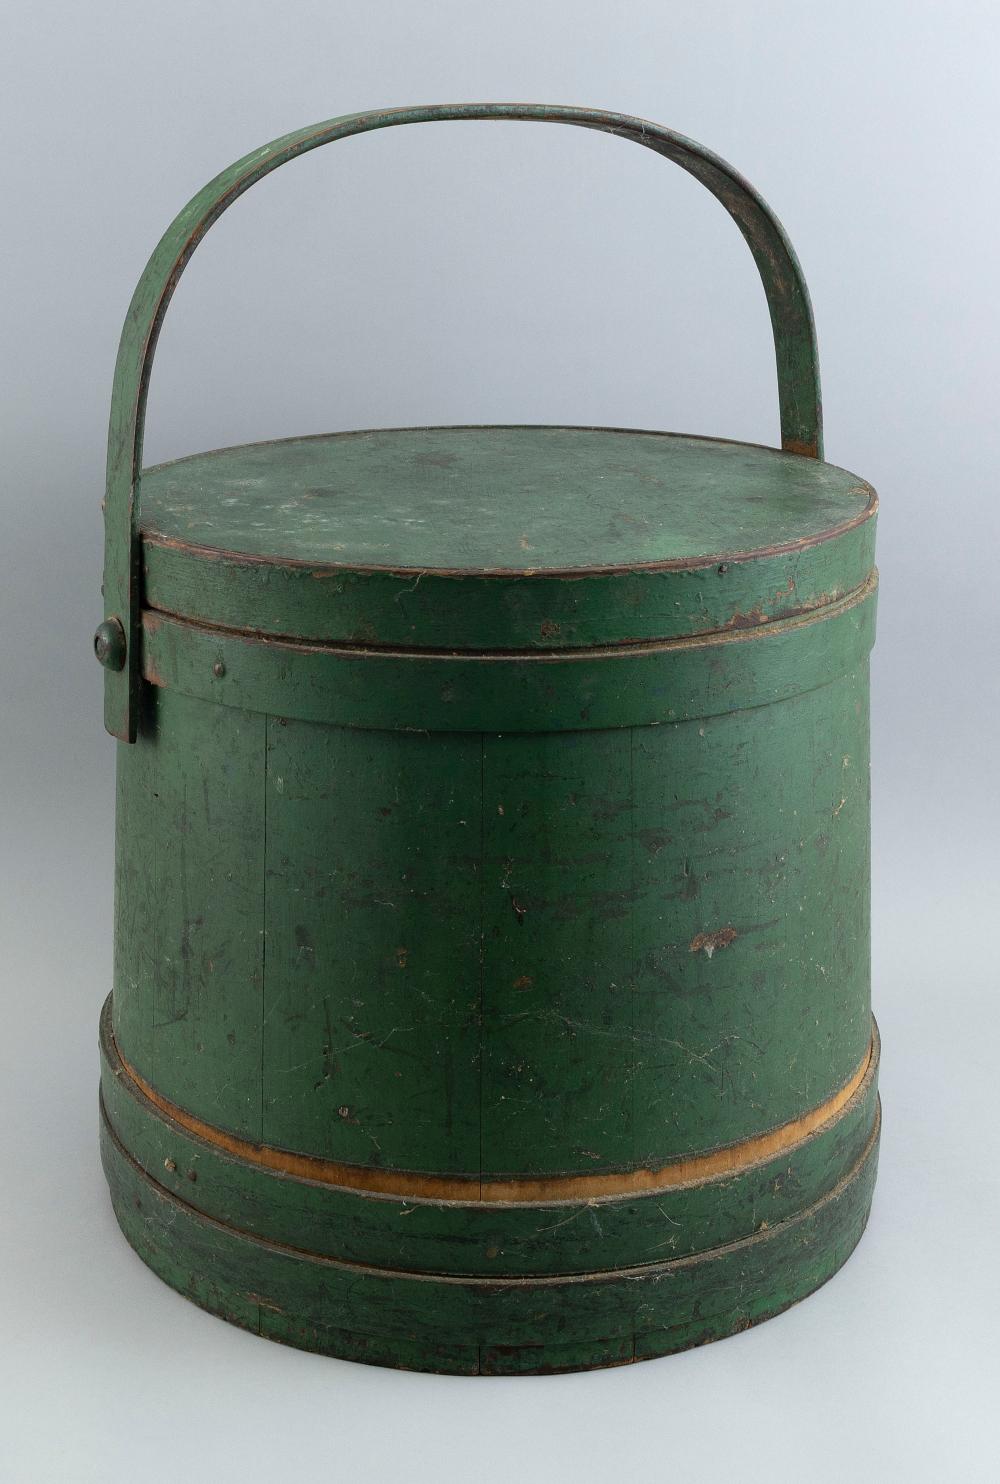 LARGE COVERED FIRKIN POSSIBLY 2f2791